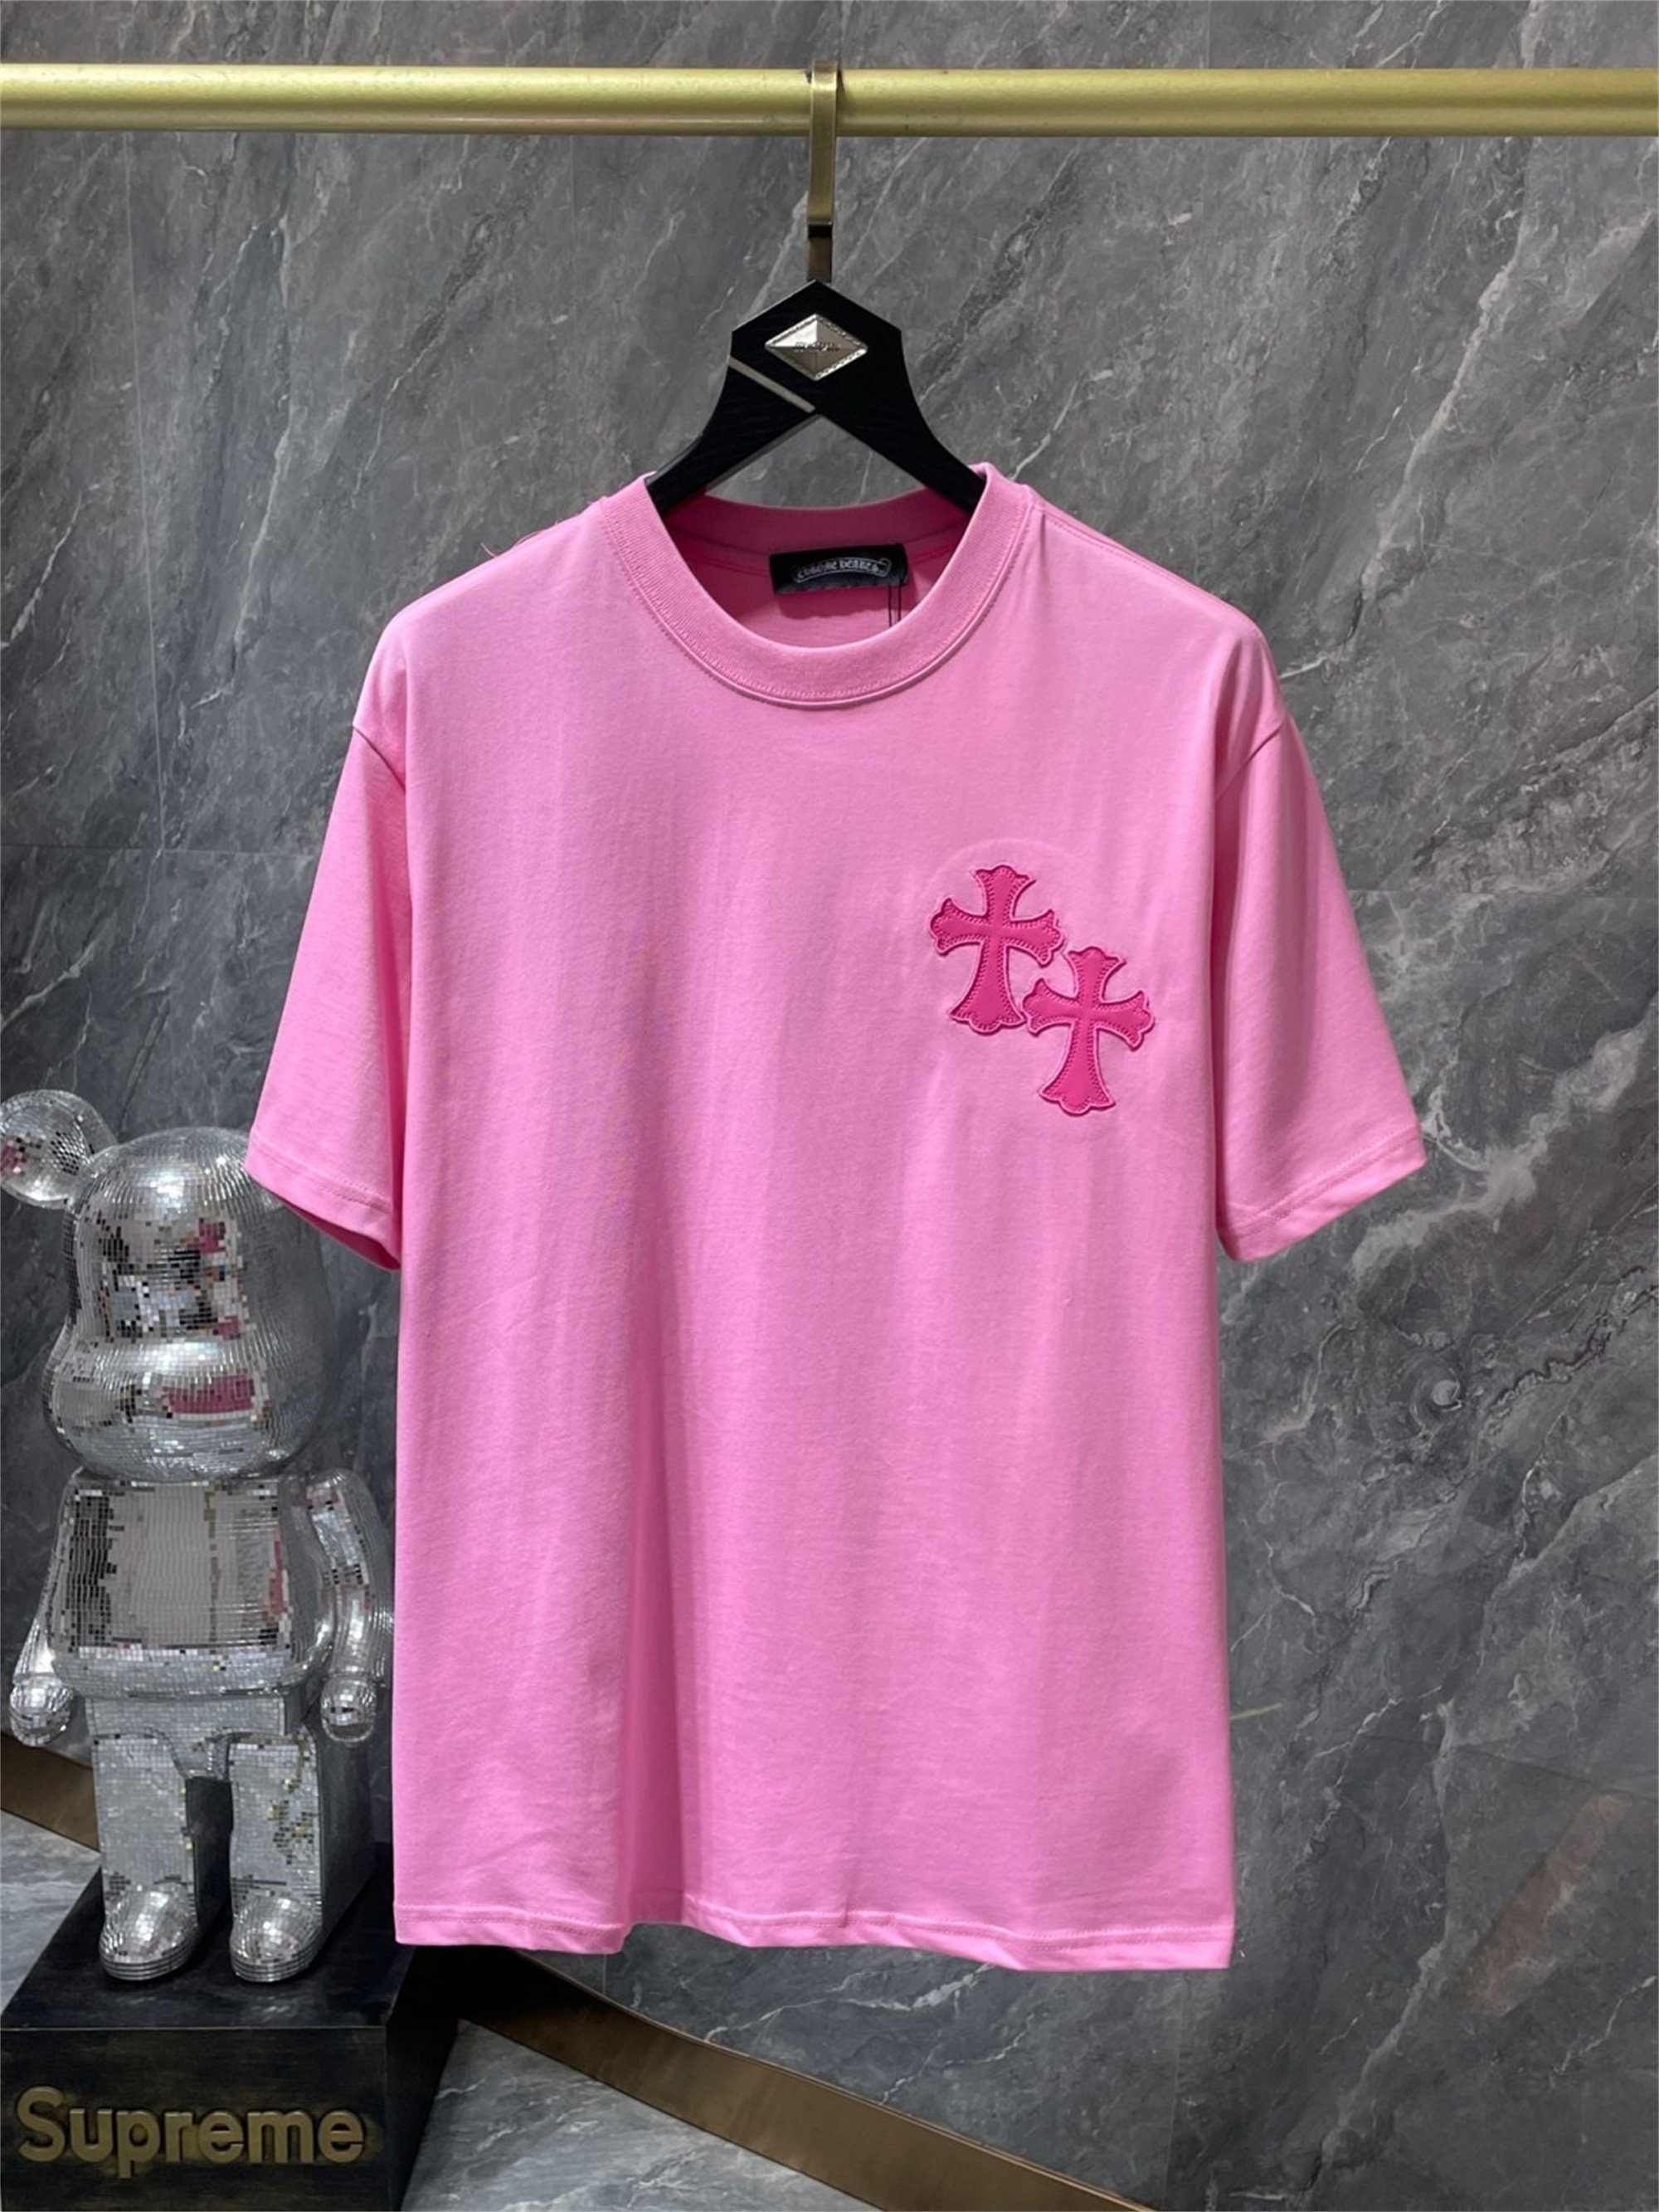 Chrome Hearts Style T-Shirt,Fancy cross T-shirt, Unique Cross Pink T-shirt , birthday gift for him